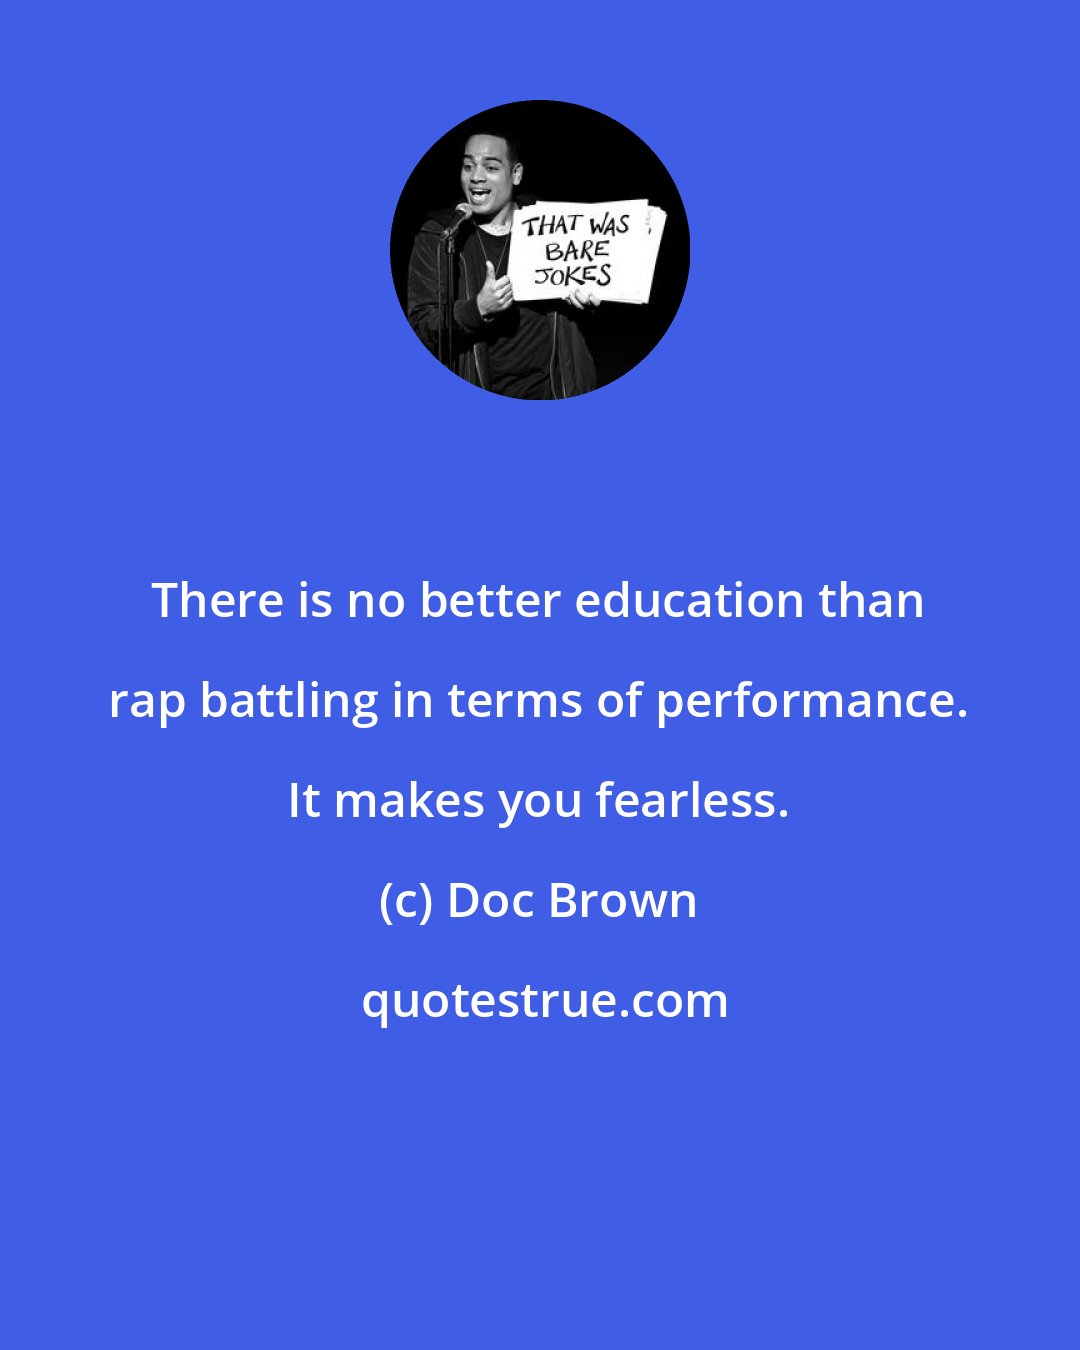 Doc Brown: There is no better education than rap battling in terms of performance. It makes you fearless.